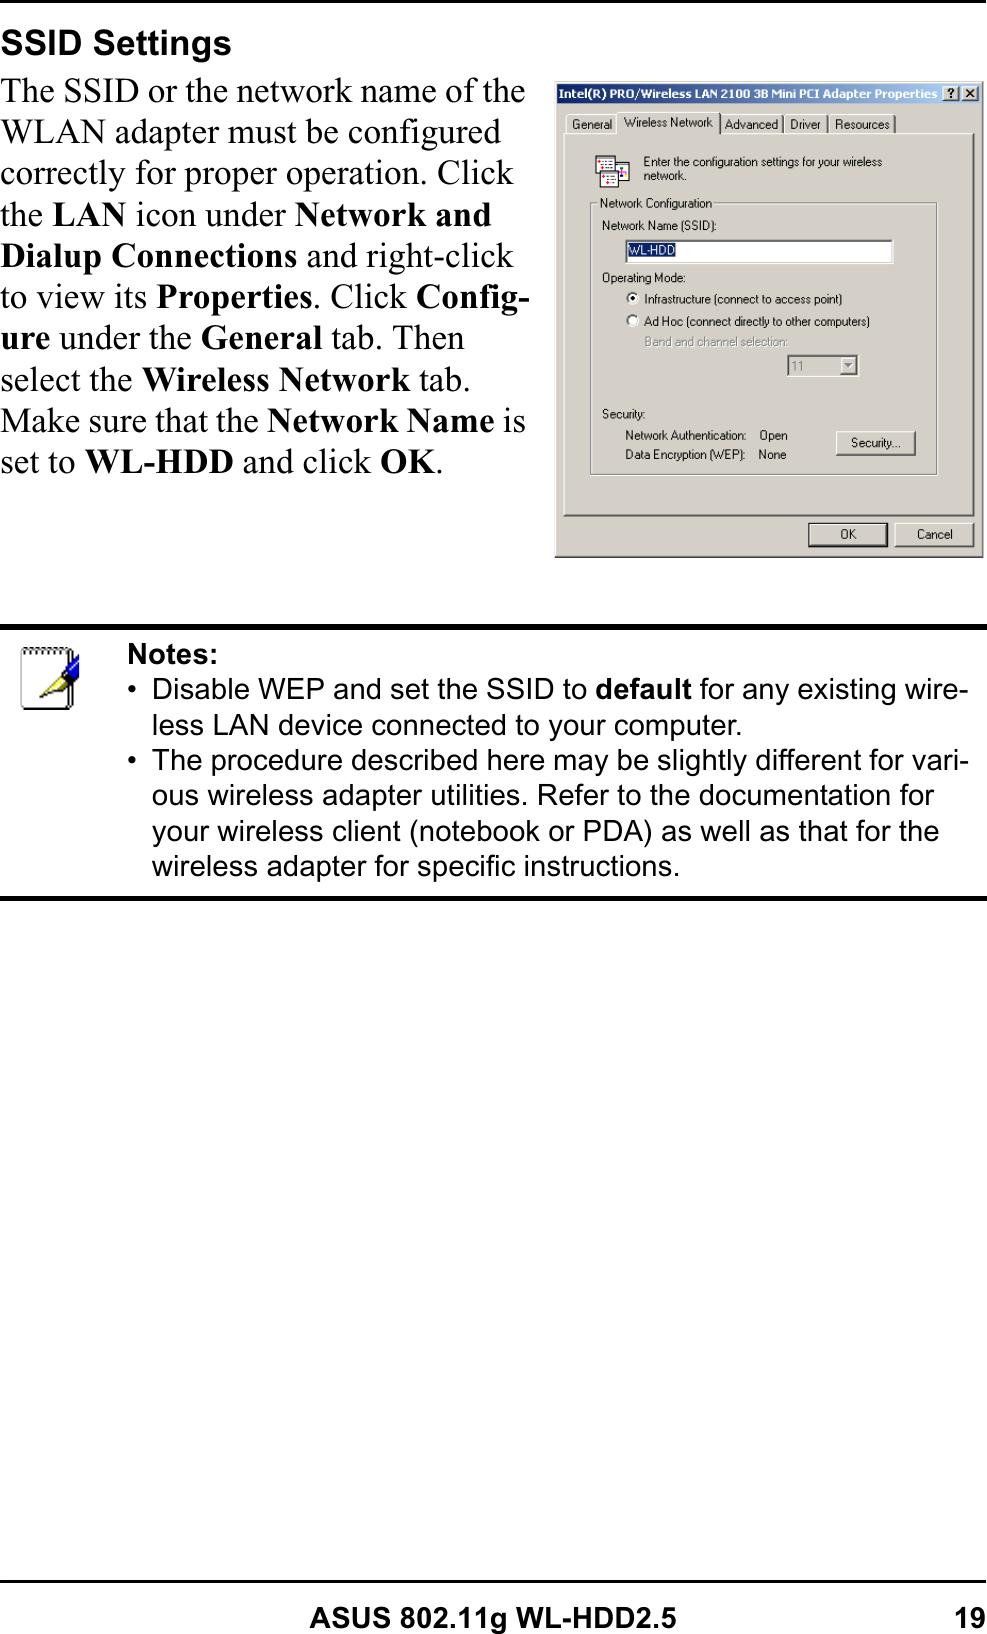 ASUS 802.11g WL-HDD2.5 19SSID SettingsThe SSID or the network name of the WLAN adapter must be configured correctly for proper operation. Click the LAN icon under Network and Dialup Connections and right-click to view its Properties. Click Config-ure under the General tab. Then select the Wireless Network tab. Make sure that the Network Name is set to WL-HDD and click OK.Notes:• Disable WEP and set the SSID to default for any existing wire-less LAN device connected to your computer.• The procedure described here may be slightly different for vari-ous wireless adapter utilities. Refer to the documentation for your wireless client (notebook or PDA) as well as that for the wireless adapter for specific instructions.